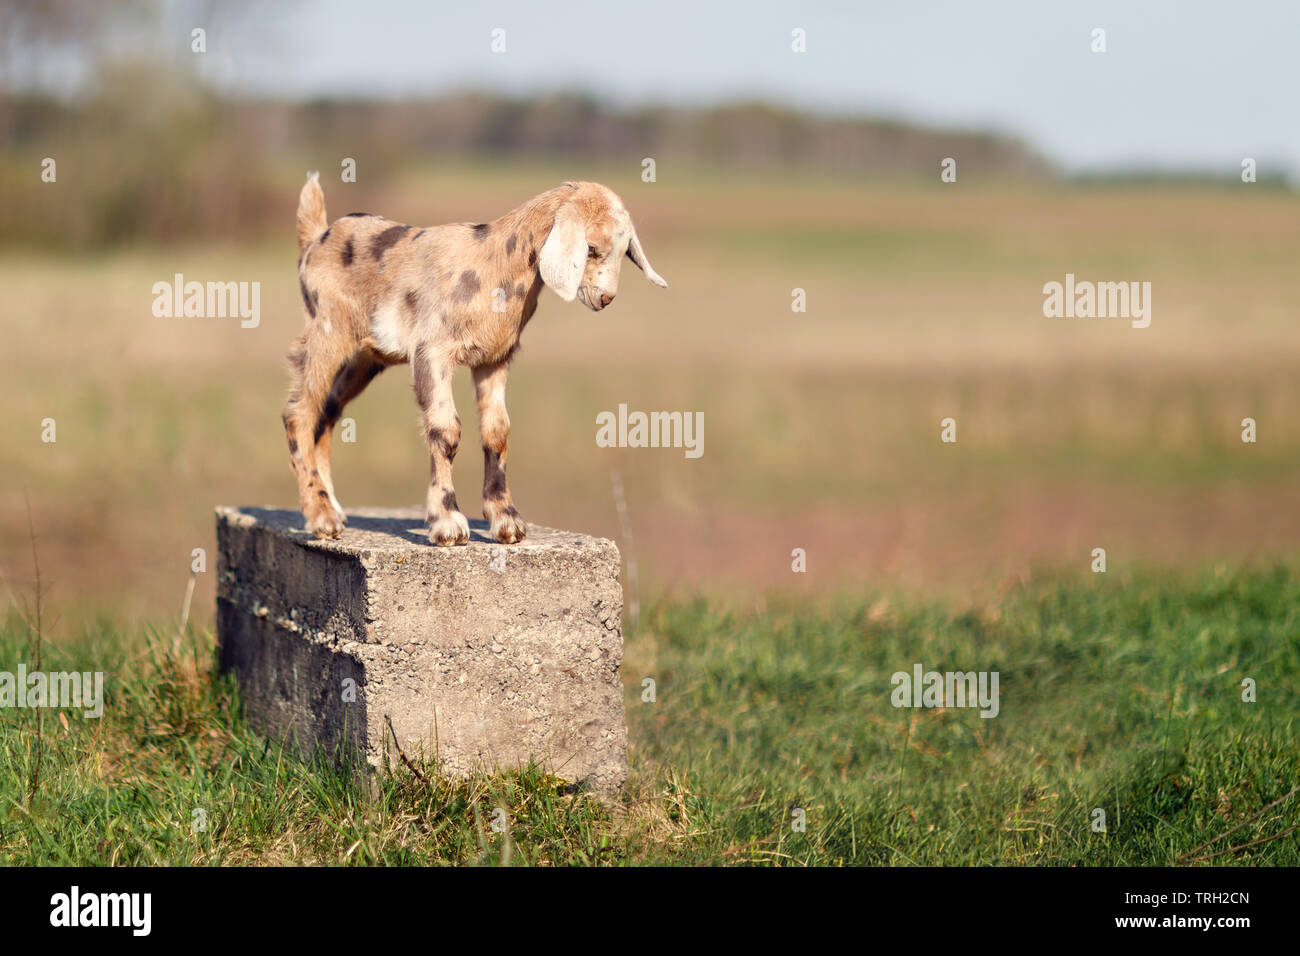 Brown spotted nice little goatling standing on a concrete block, like a statue Stock Photo